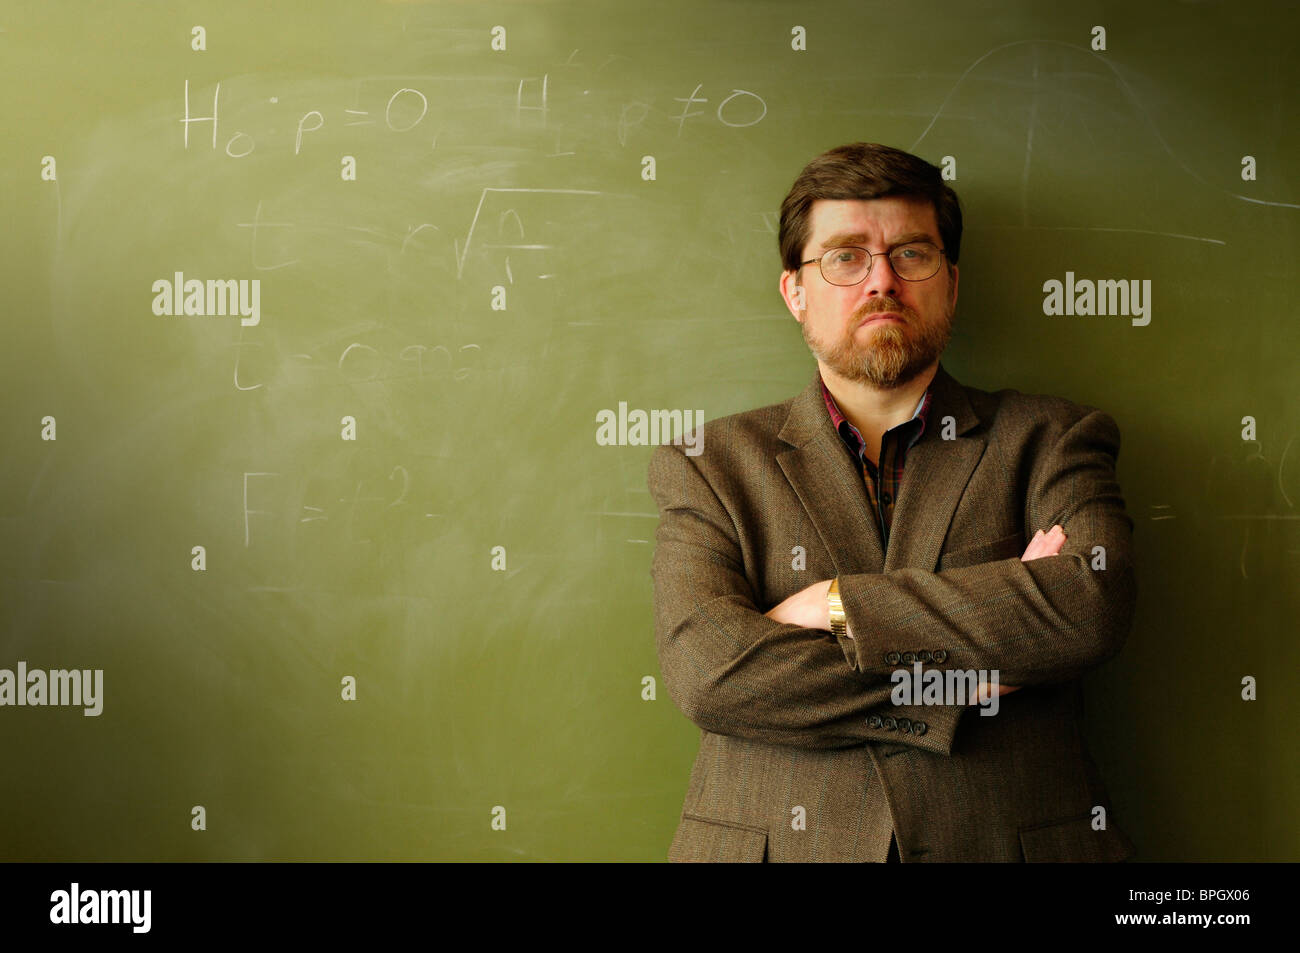 Math professor or teacher standing in front of a green chalkboard, possibly annoyed or determined. Stock Photo